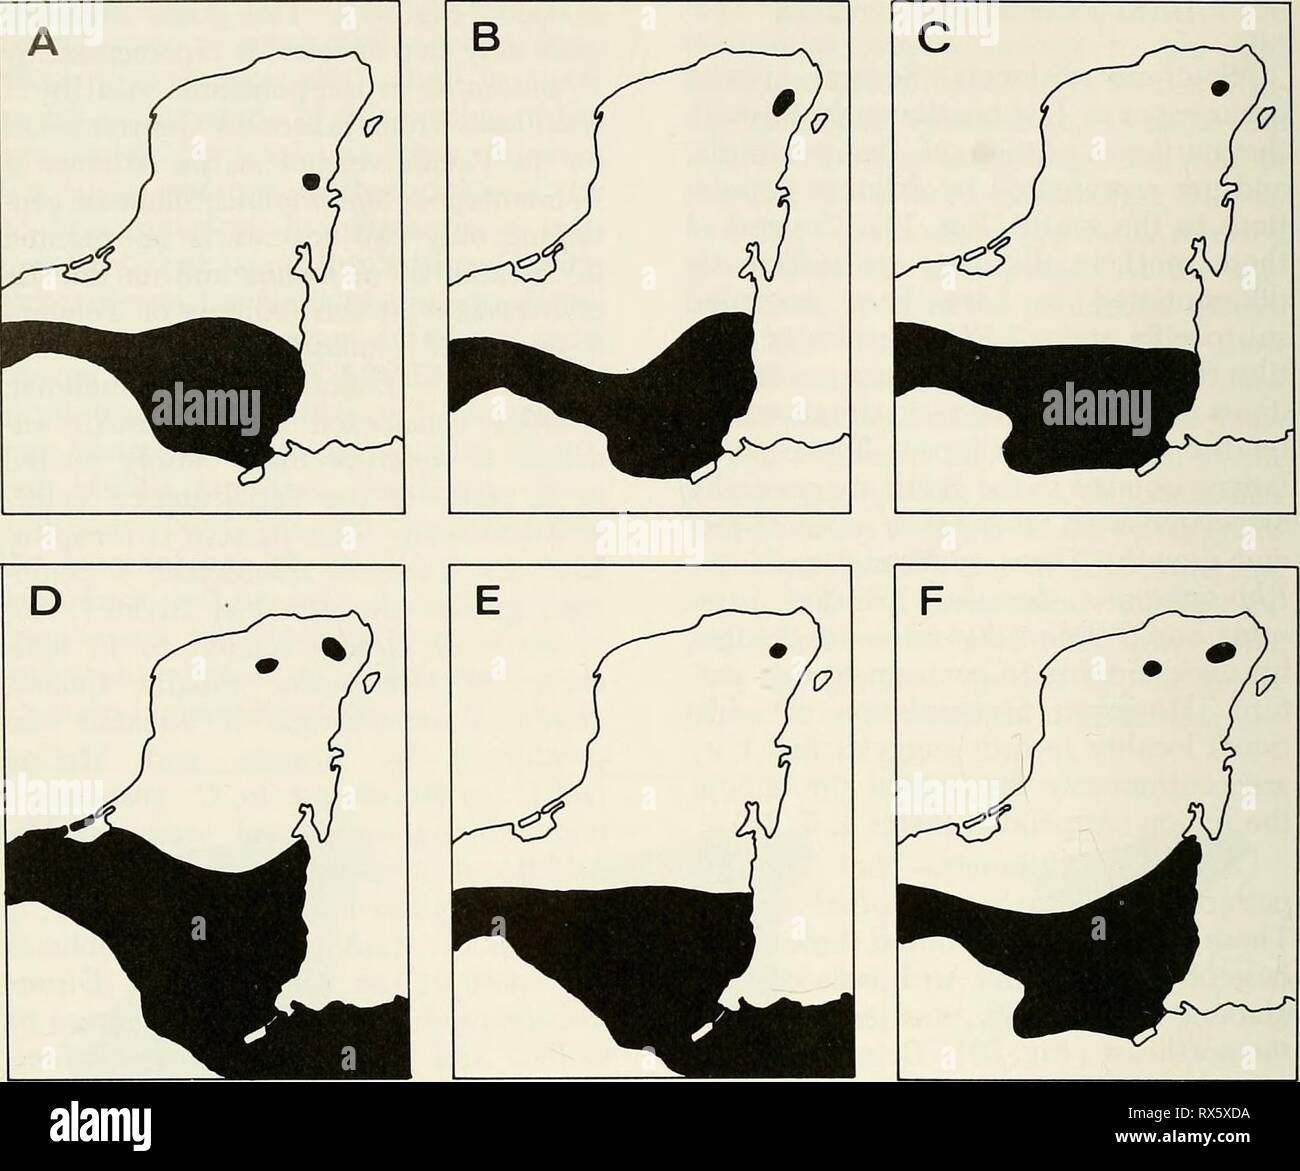 An ecogeographic analysis of the An ecogeographic analysis of the herpetofauna of the Yucatan Peninsula ecogeographicana00leej Year: 1980  34 MISCELLANEOUS PUBLICATION MUSEUM OF NATURAL HISTORY   Fig. 20.—North peninsular disjuncts. Extra-peninsular distributions are rough approximations. A. Hyla ehraccata. B. Conjtophanes hernandezi. C. Eumeces sumichrasti. D. Sphenomorphus cher- riei. E. Dendrophidion vinitor. F. Scaphiodontophis annidatus. the afBnities of the peninsular foim he with the population on the Pacific ver- sant, then the species represents, in mod- ified form, an example of the  Stock Photo